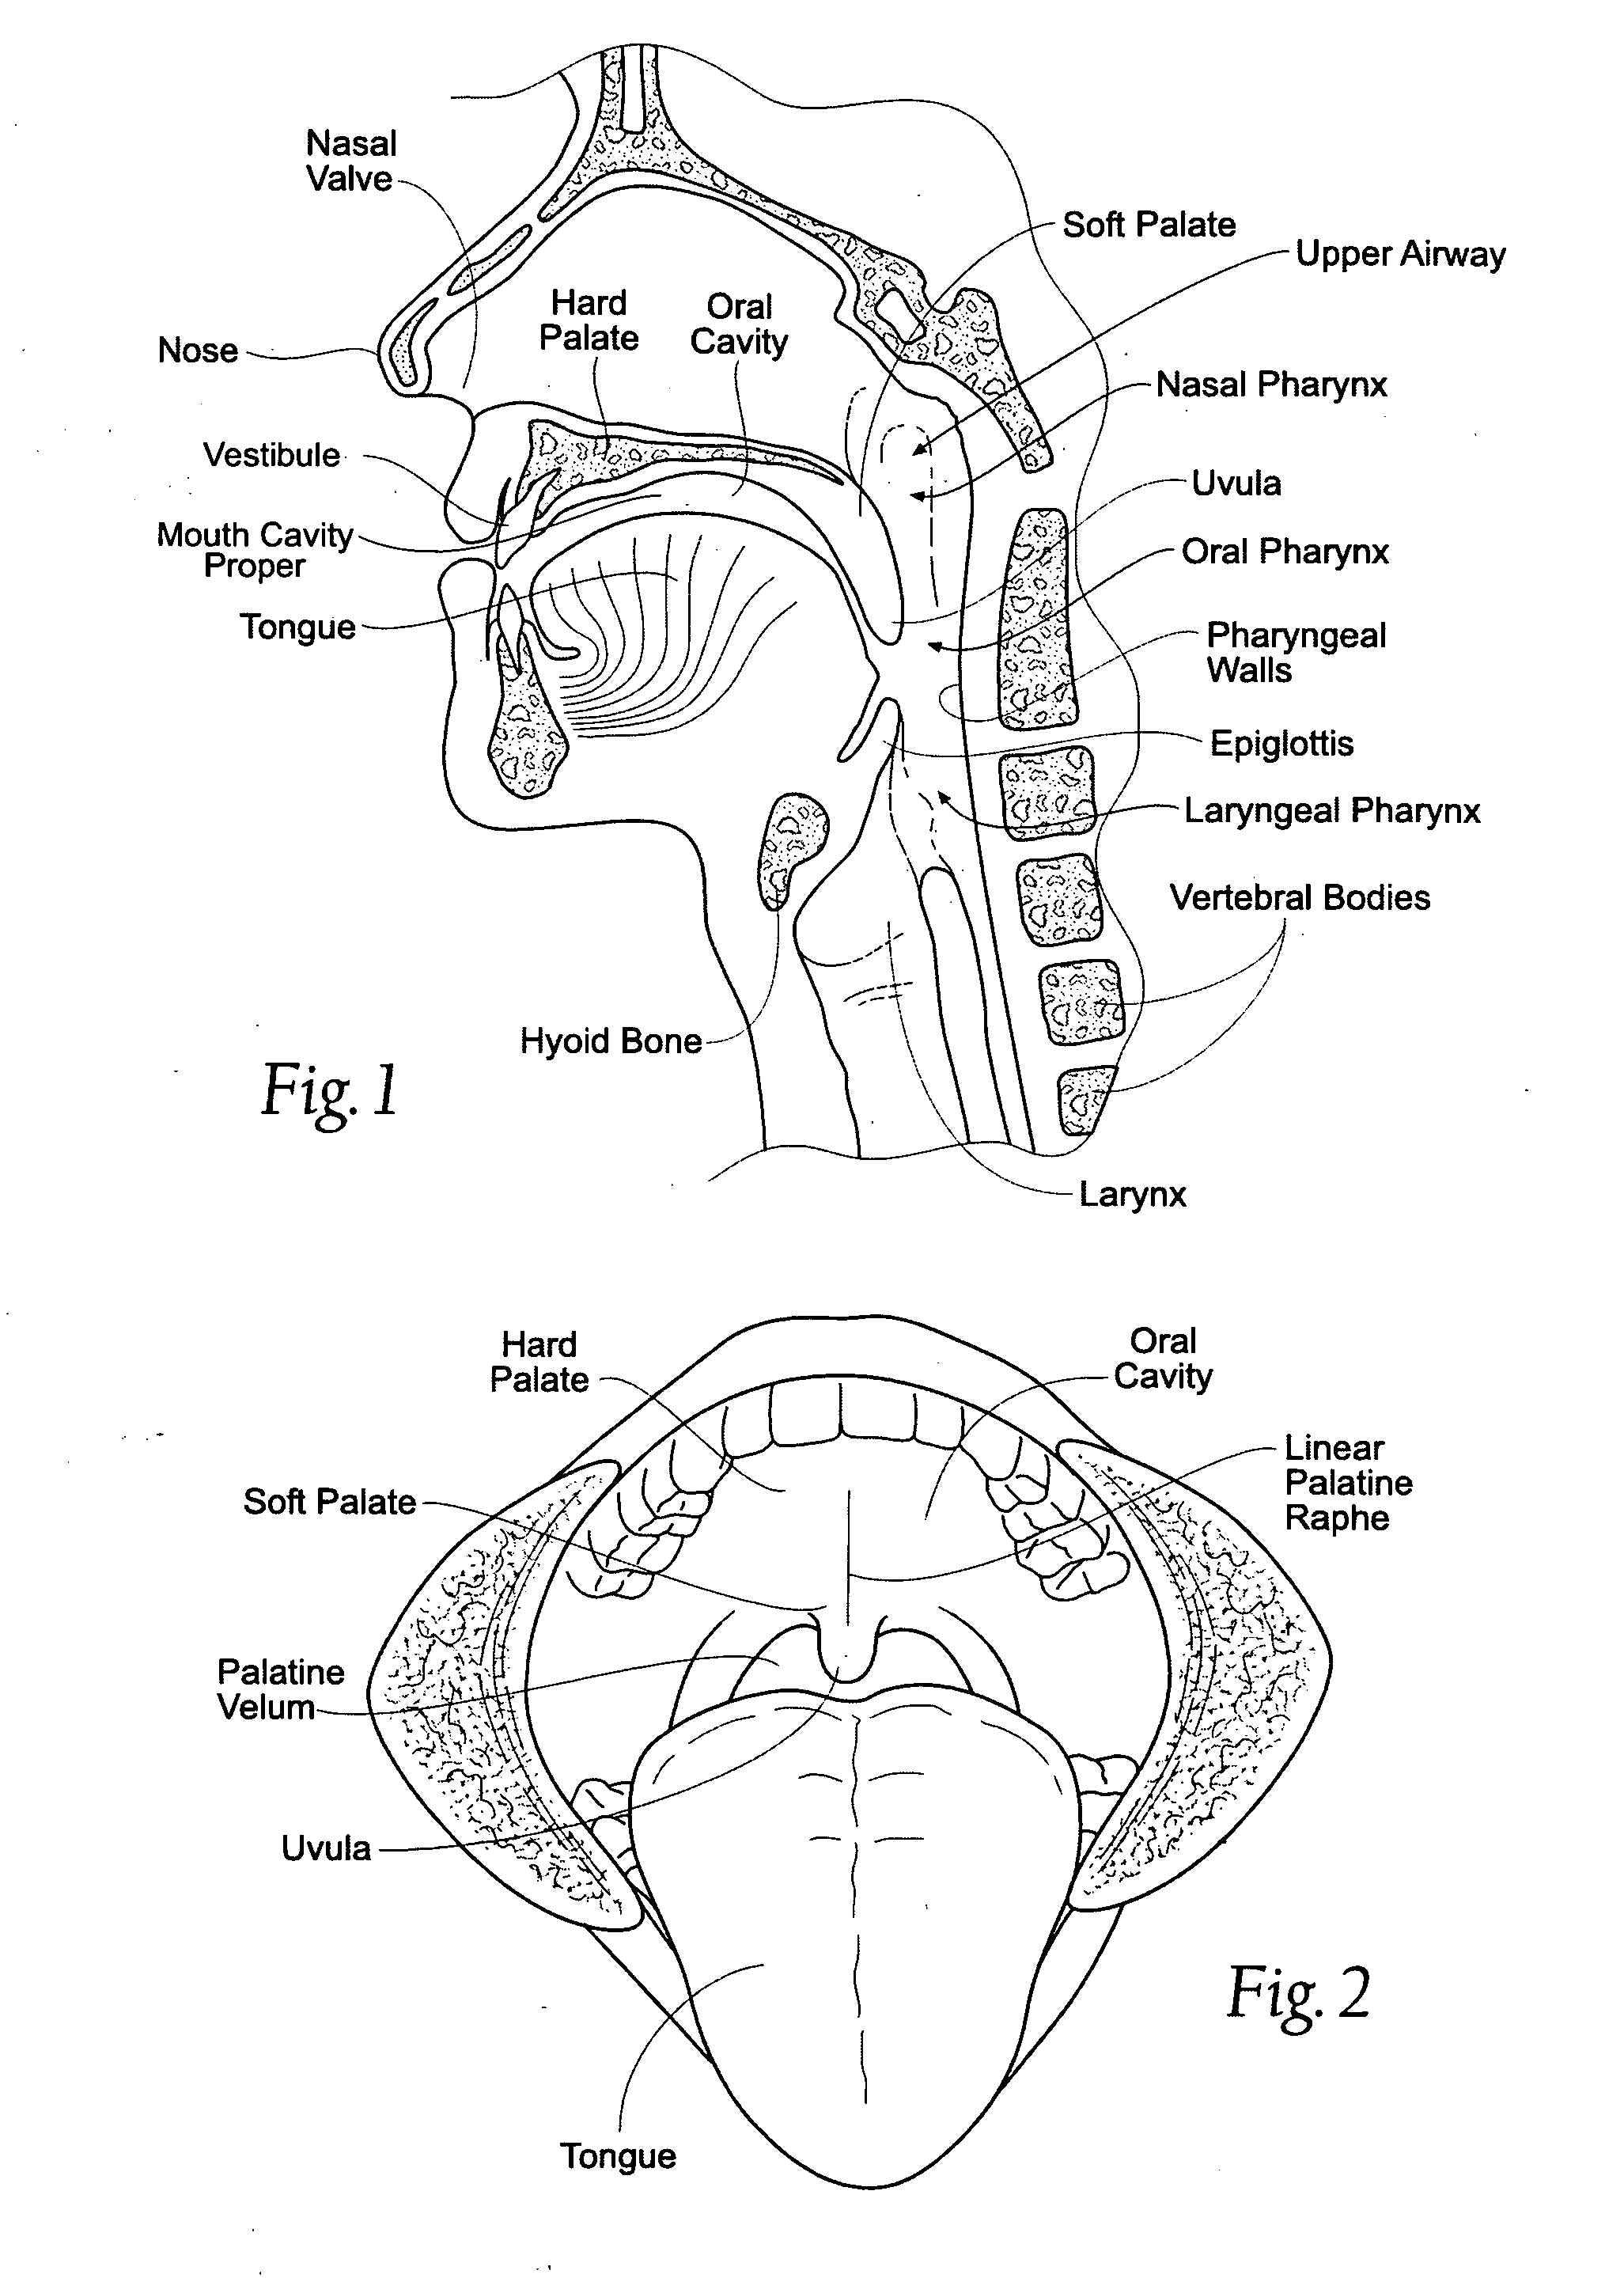 Devices, systems and methods using magnetic force systems in the tongue